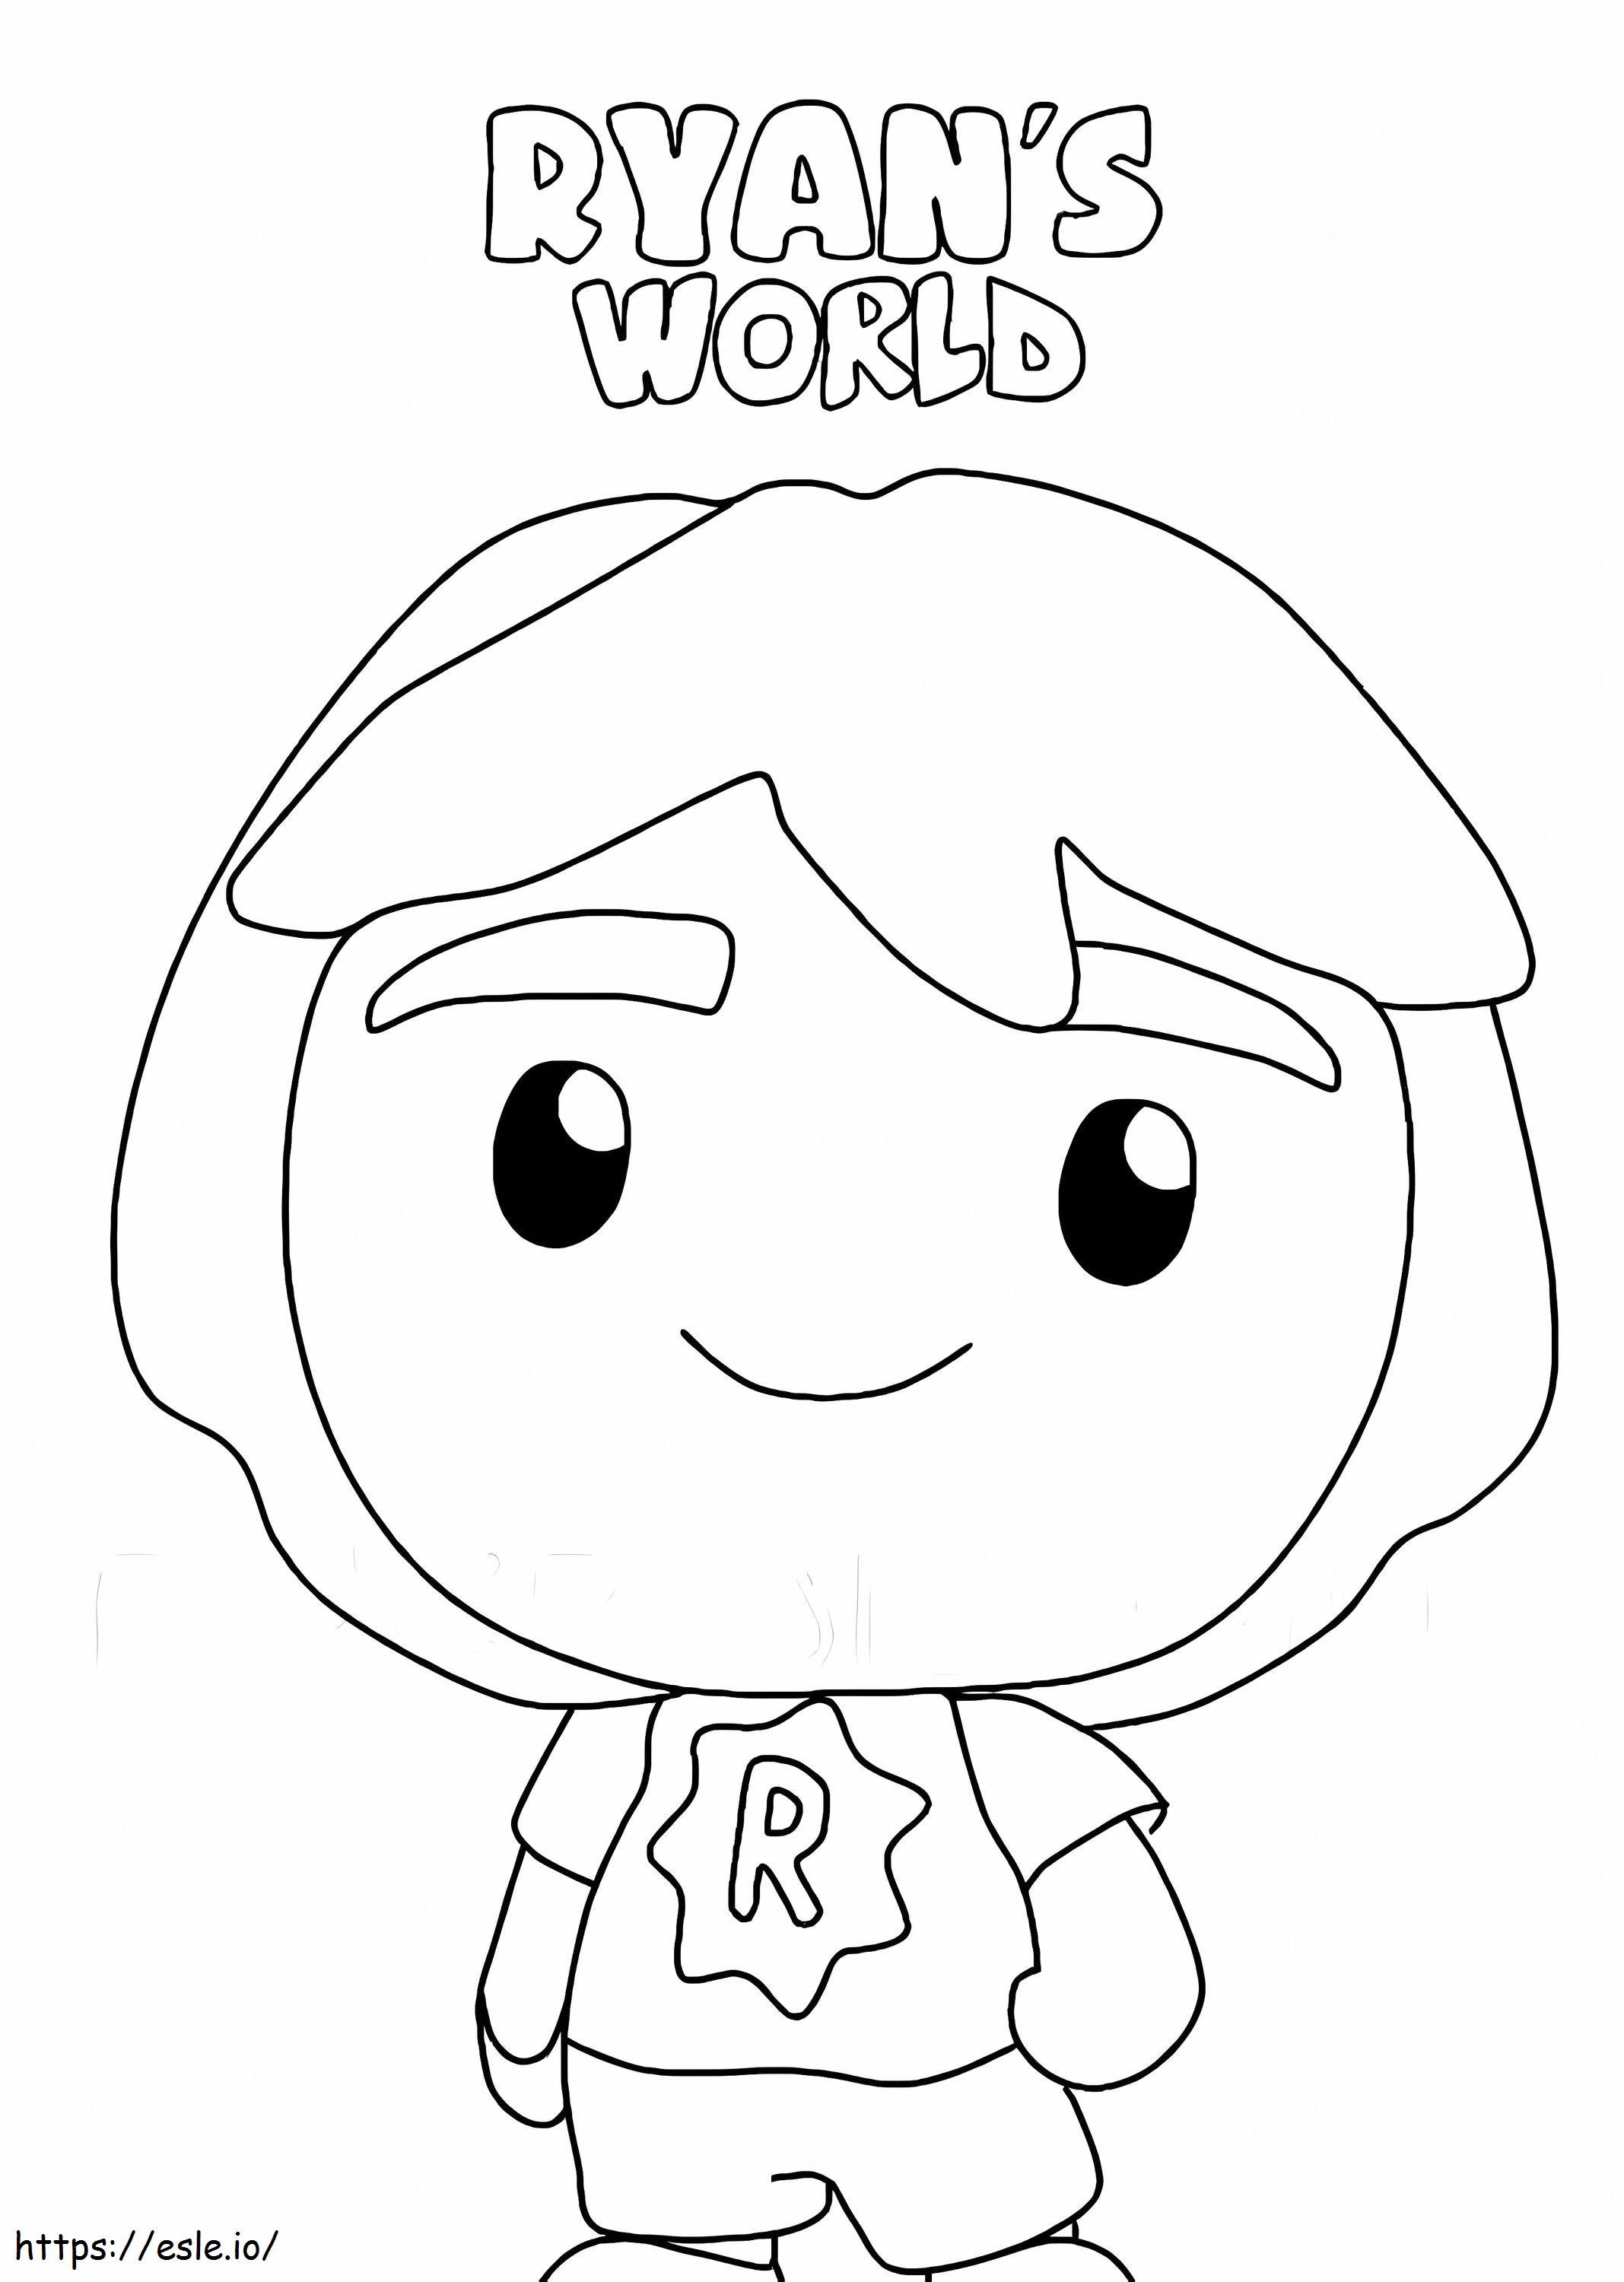 Ryans world coloring page